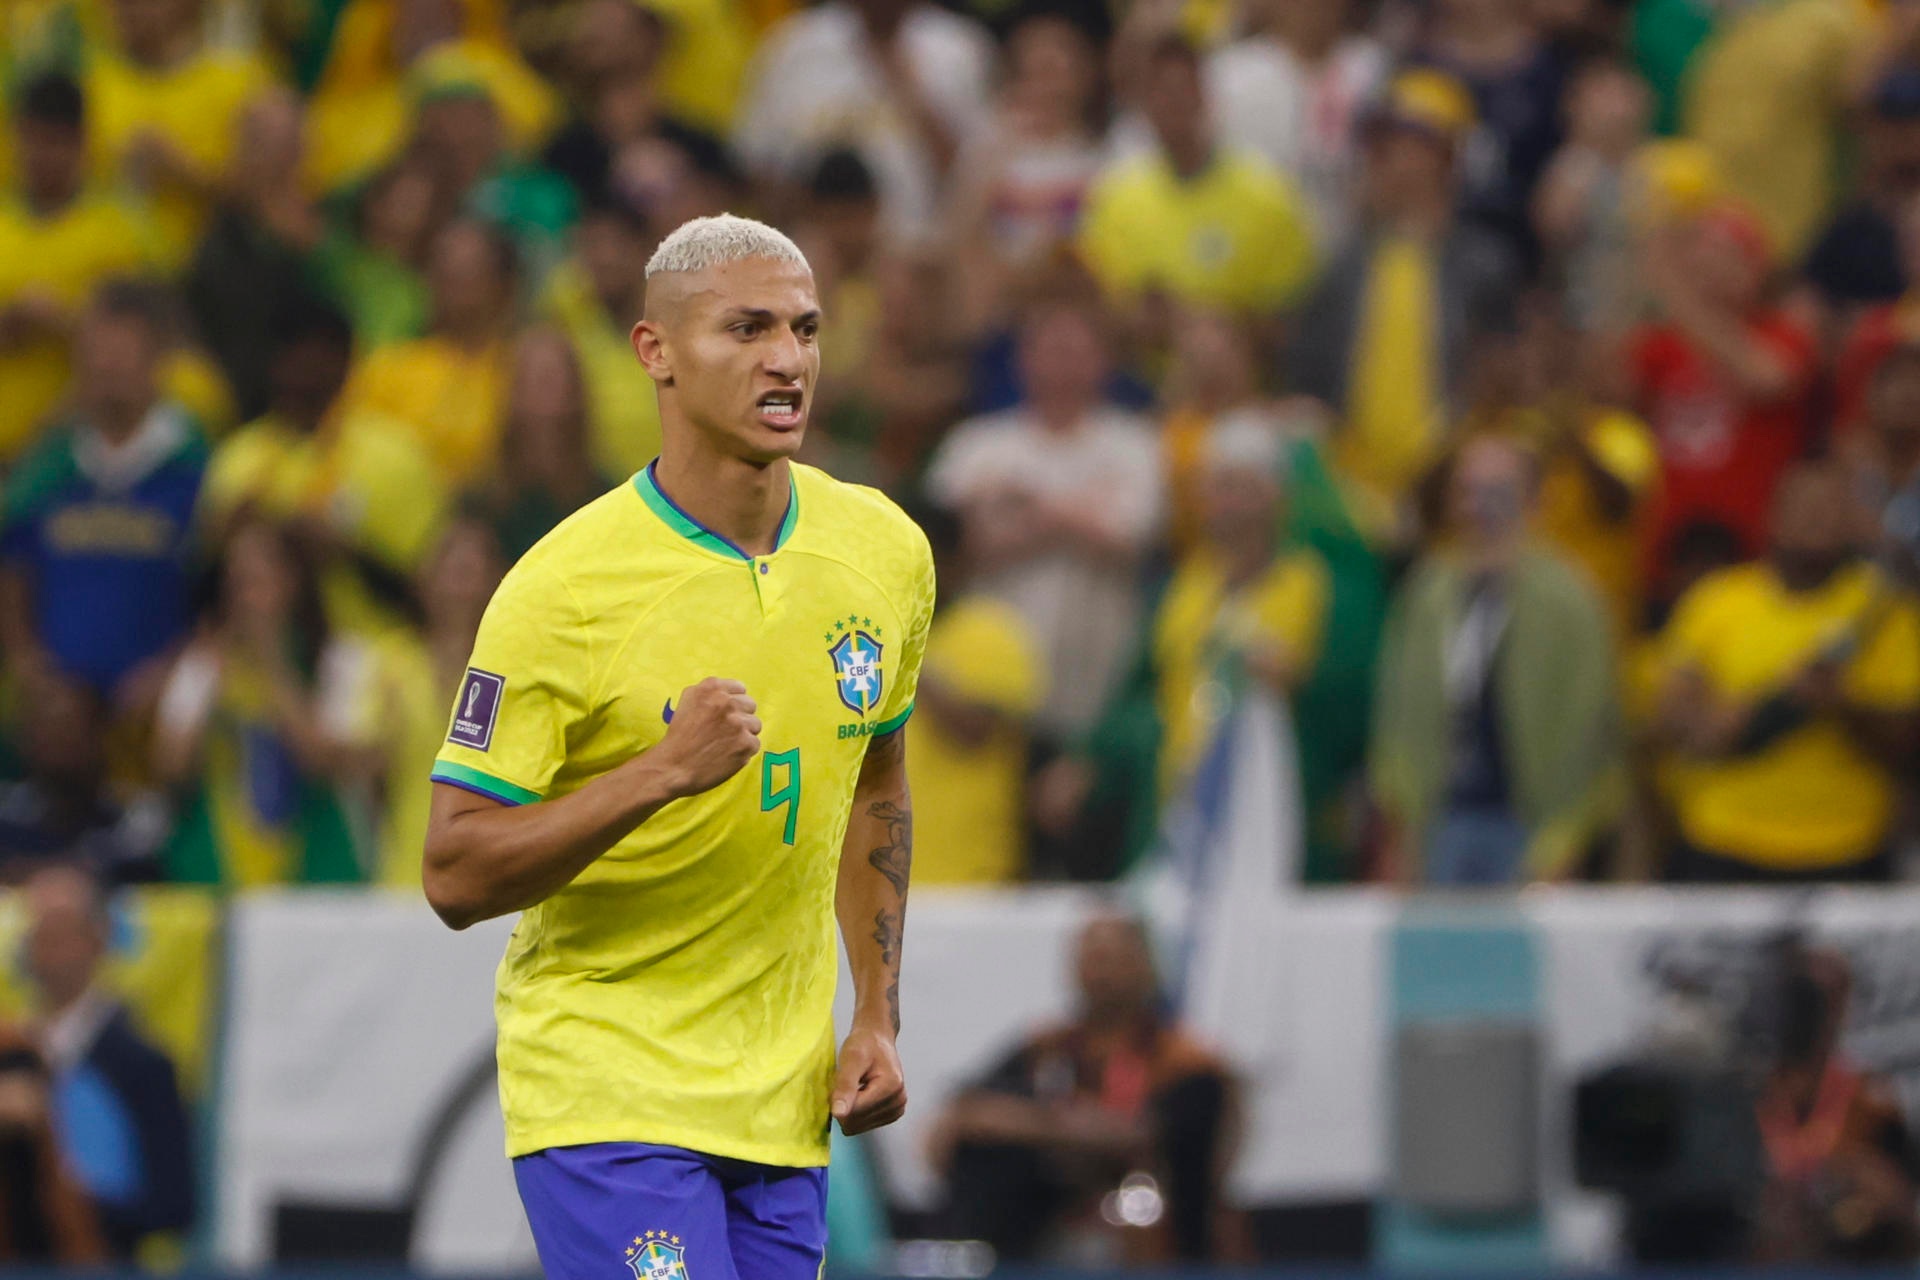 Richarlison offers himself to Real Madrid: 